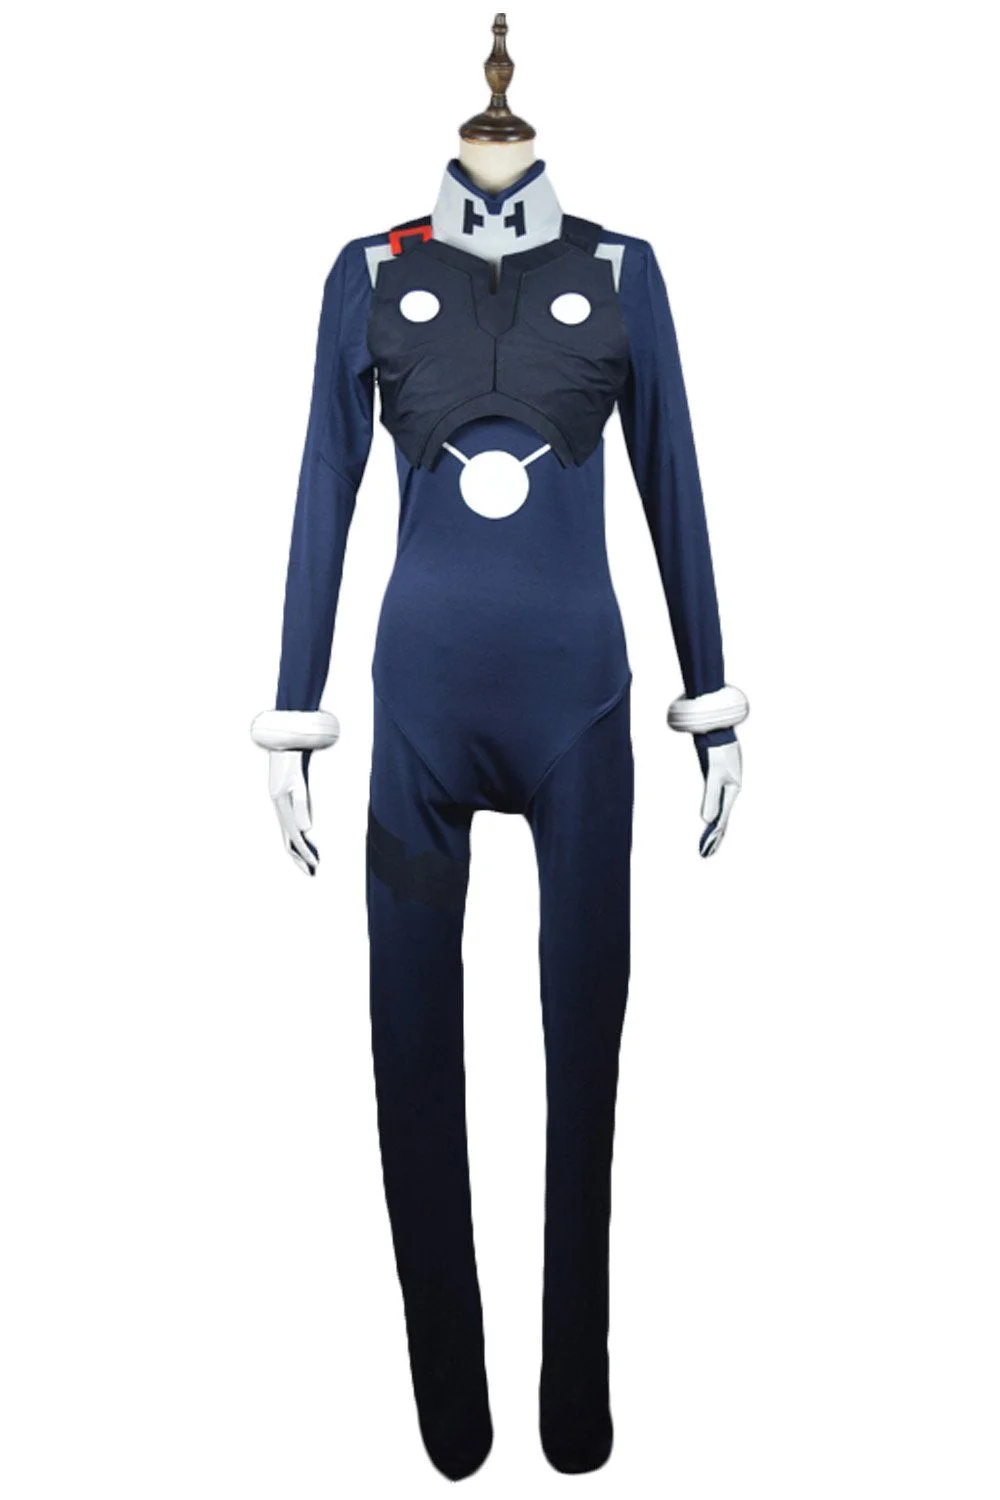 DARLING in the FRANXX HIRO Code 016 Pilot Outfit Suit Cosplay Costume